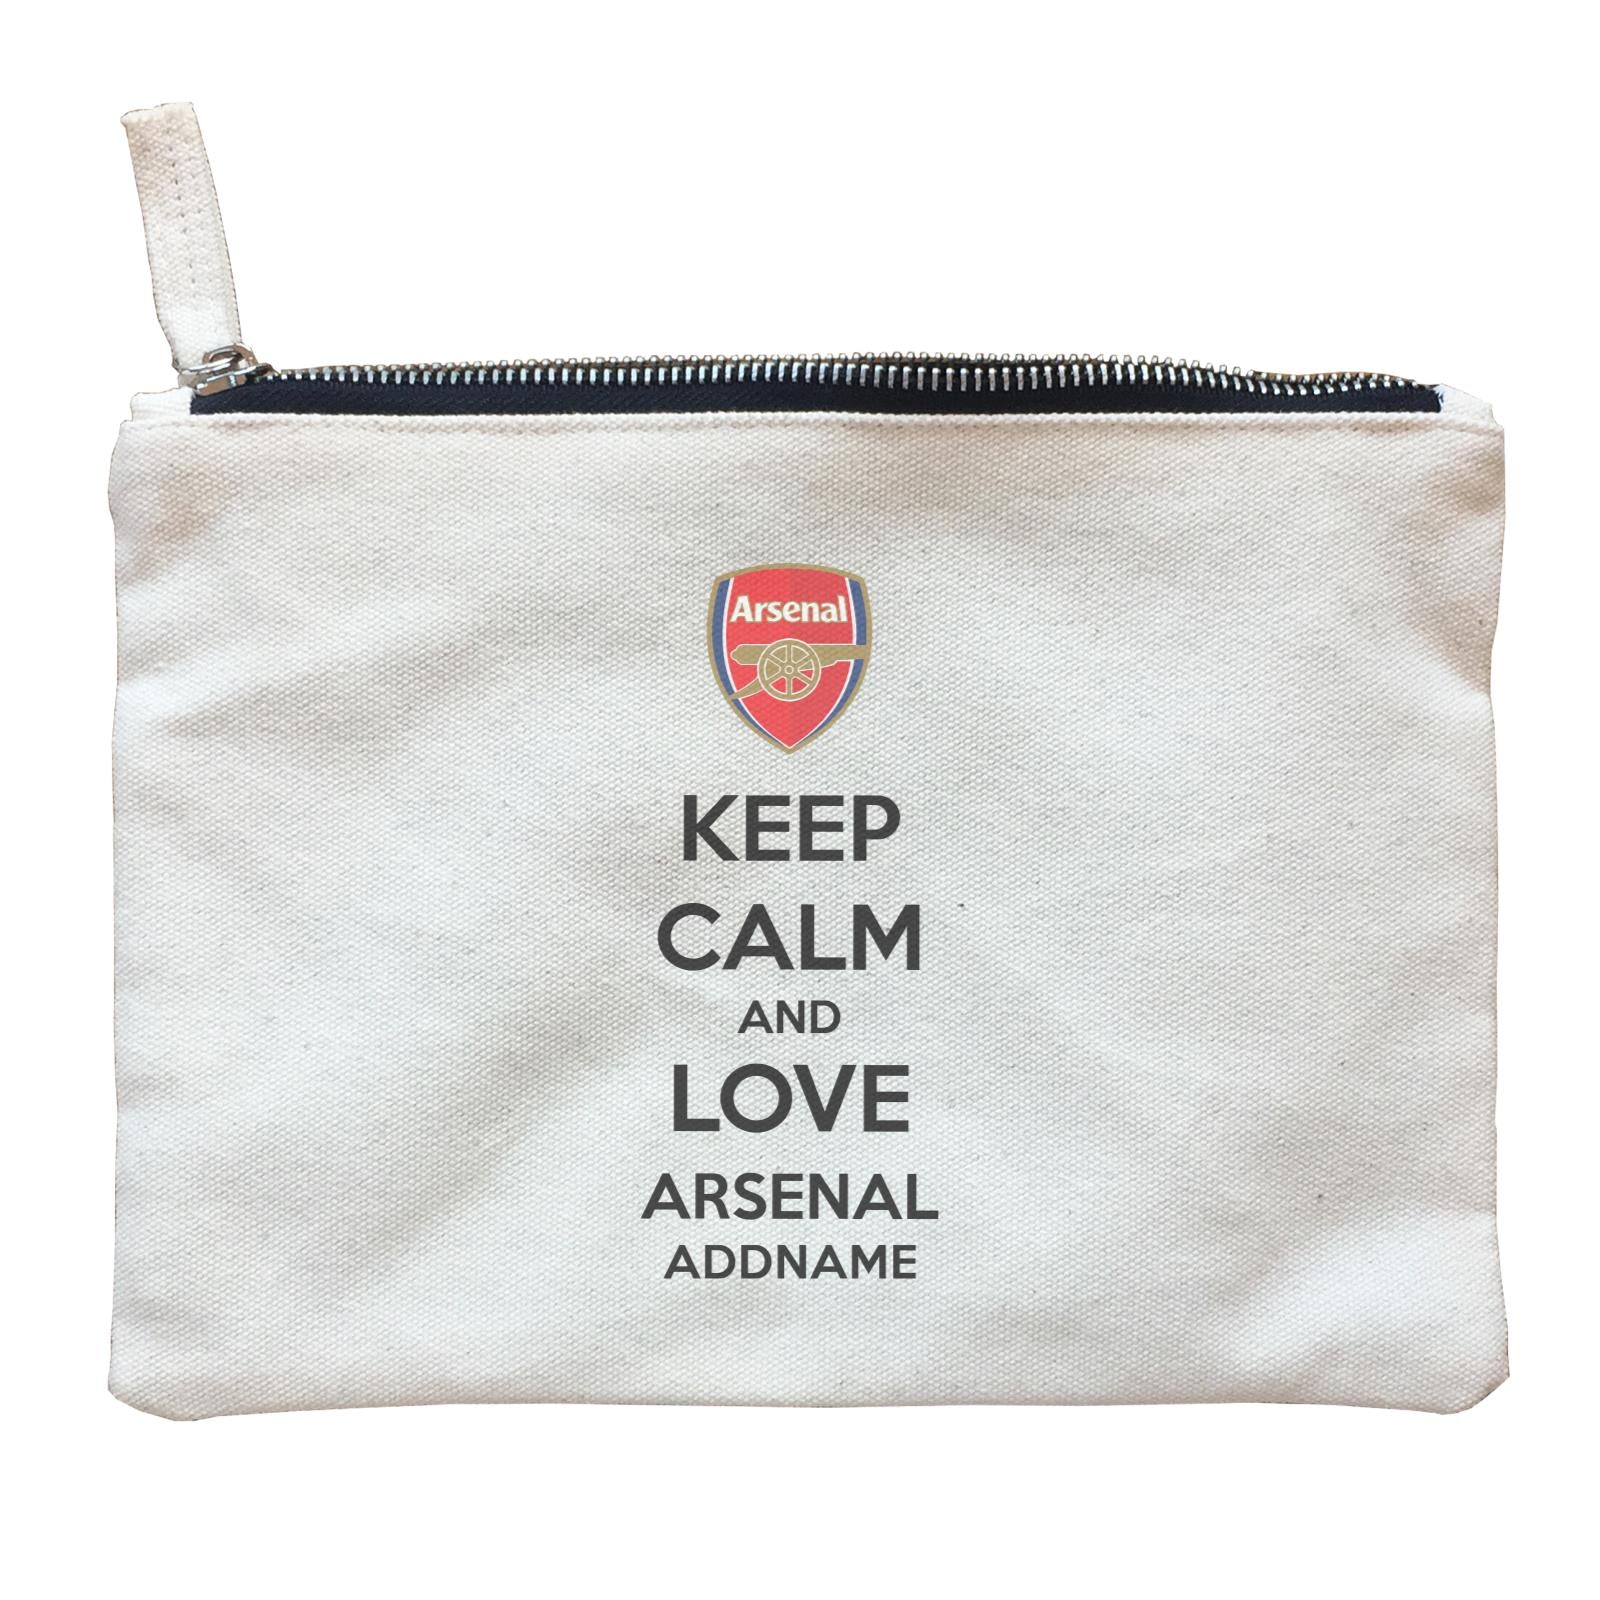 Arsenal Football Keep Calm And Love Series Addname Zipper Pouch